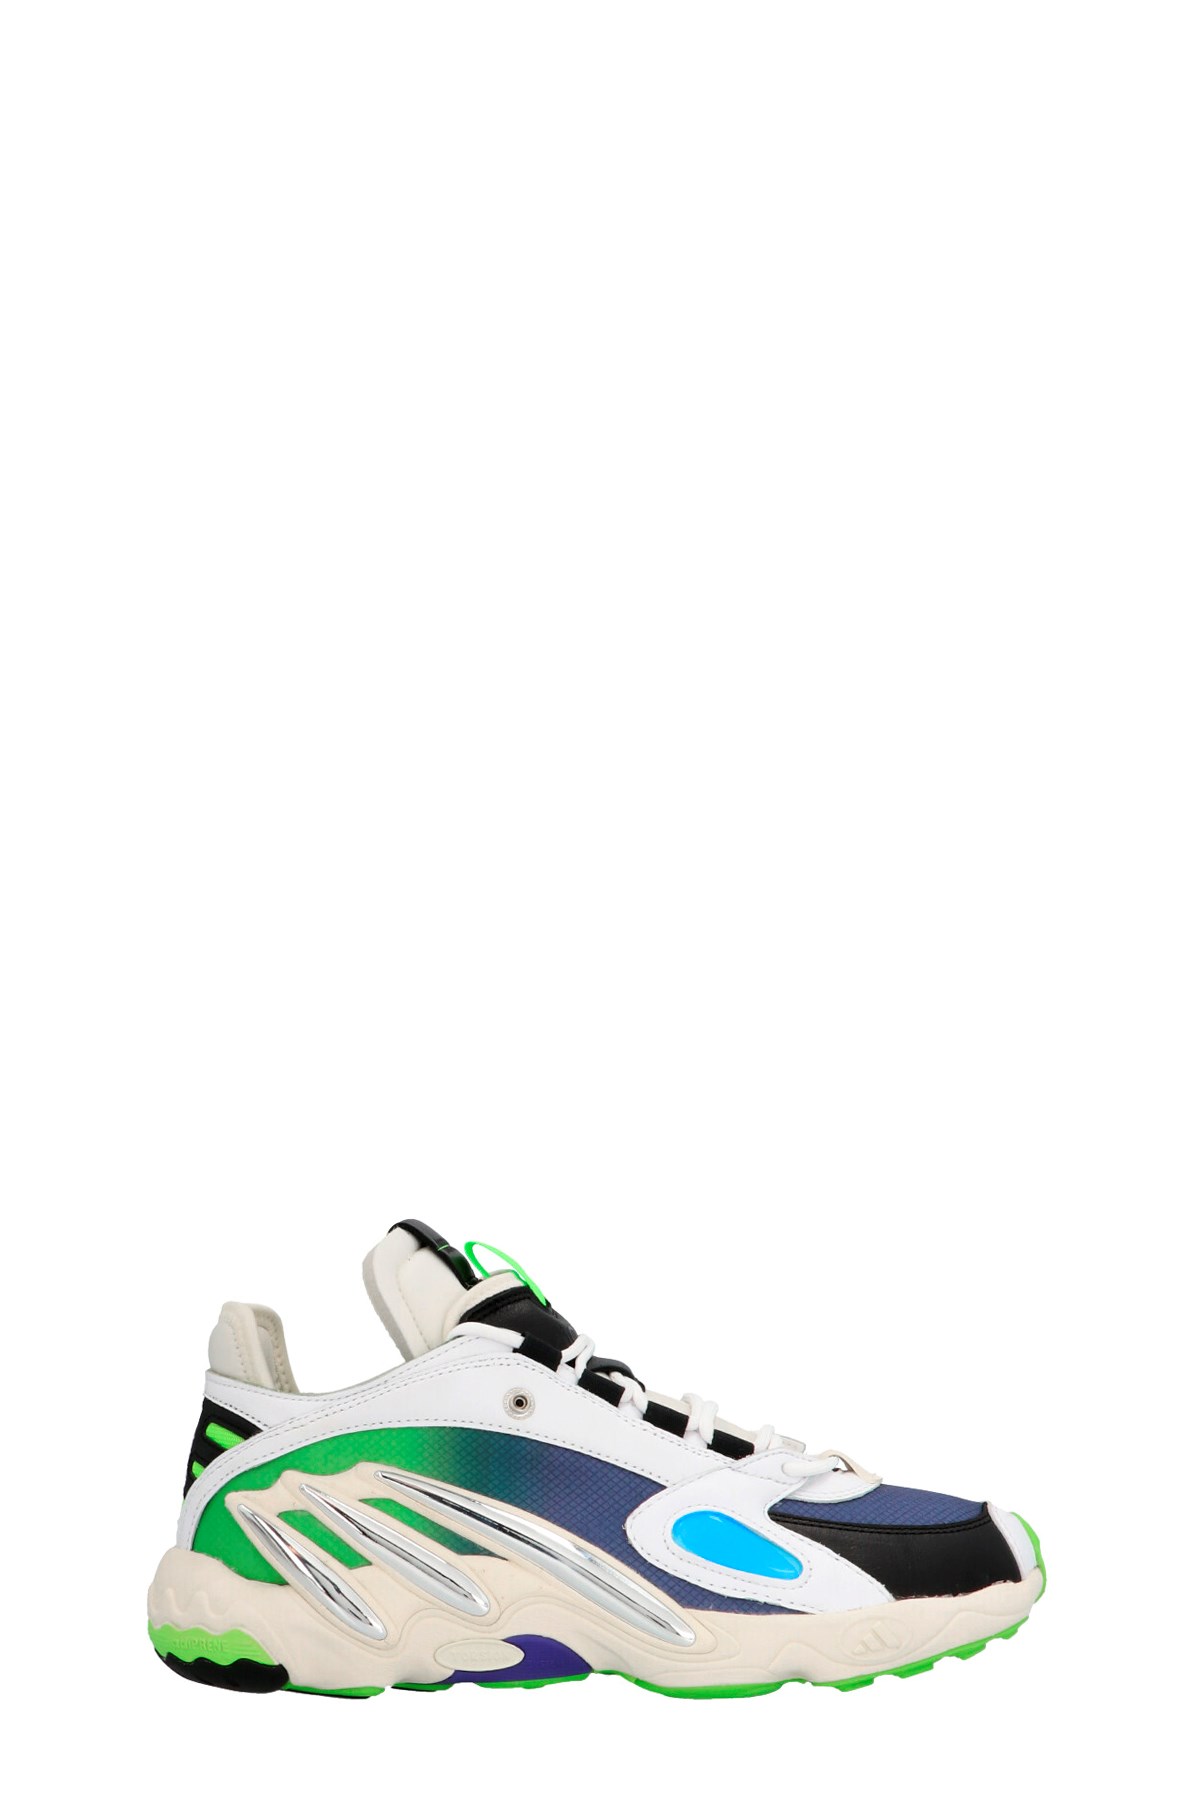 ADIDAS STATEMENT Collab. Sankuanz ' Solution Streetball ' Sneakers